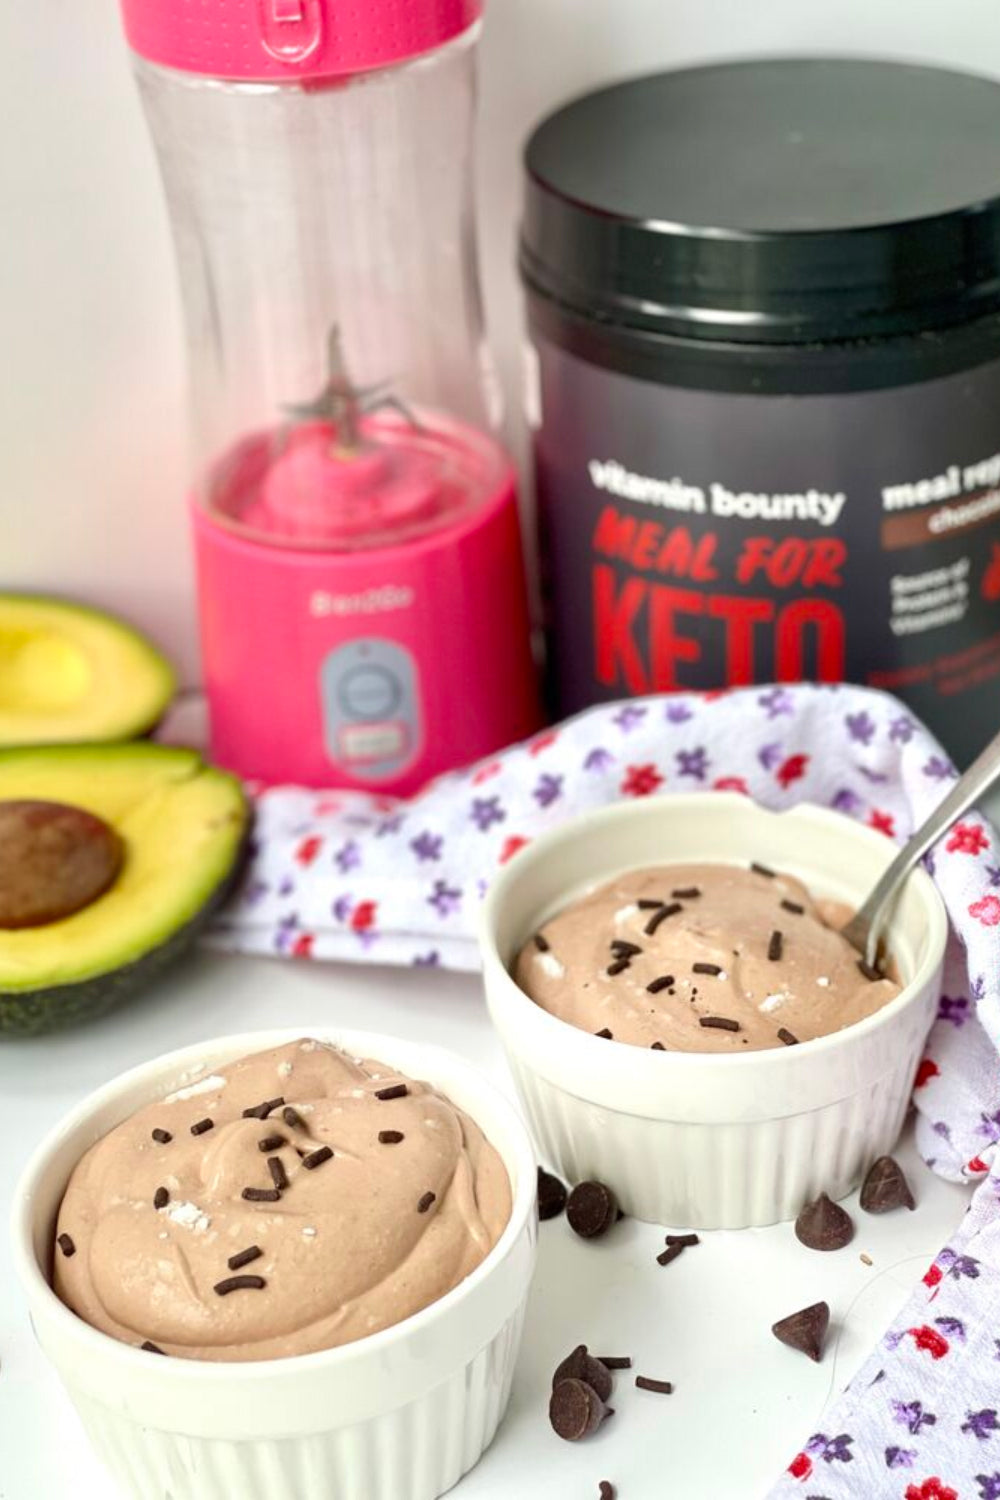 Meal For Keto Avocado Chocolate Mousse pictured in ceramic jars 